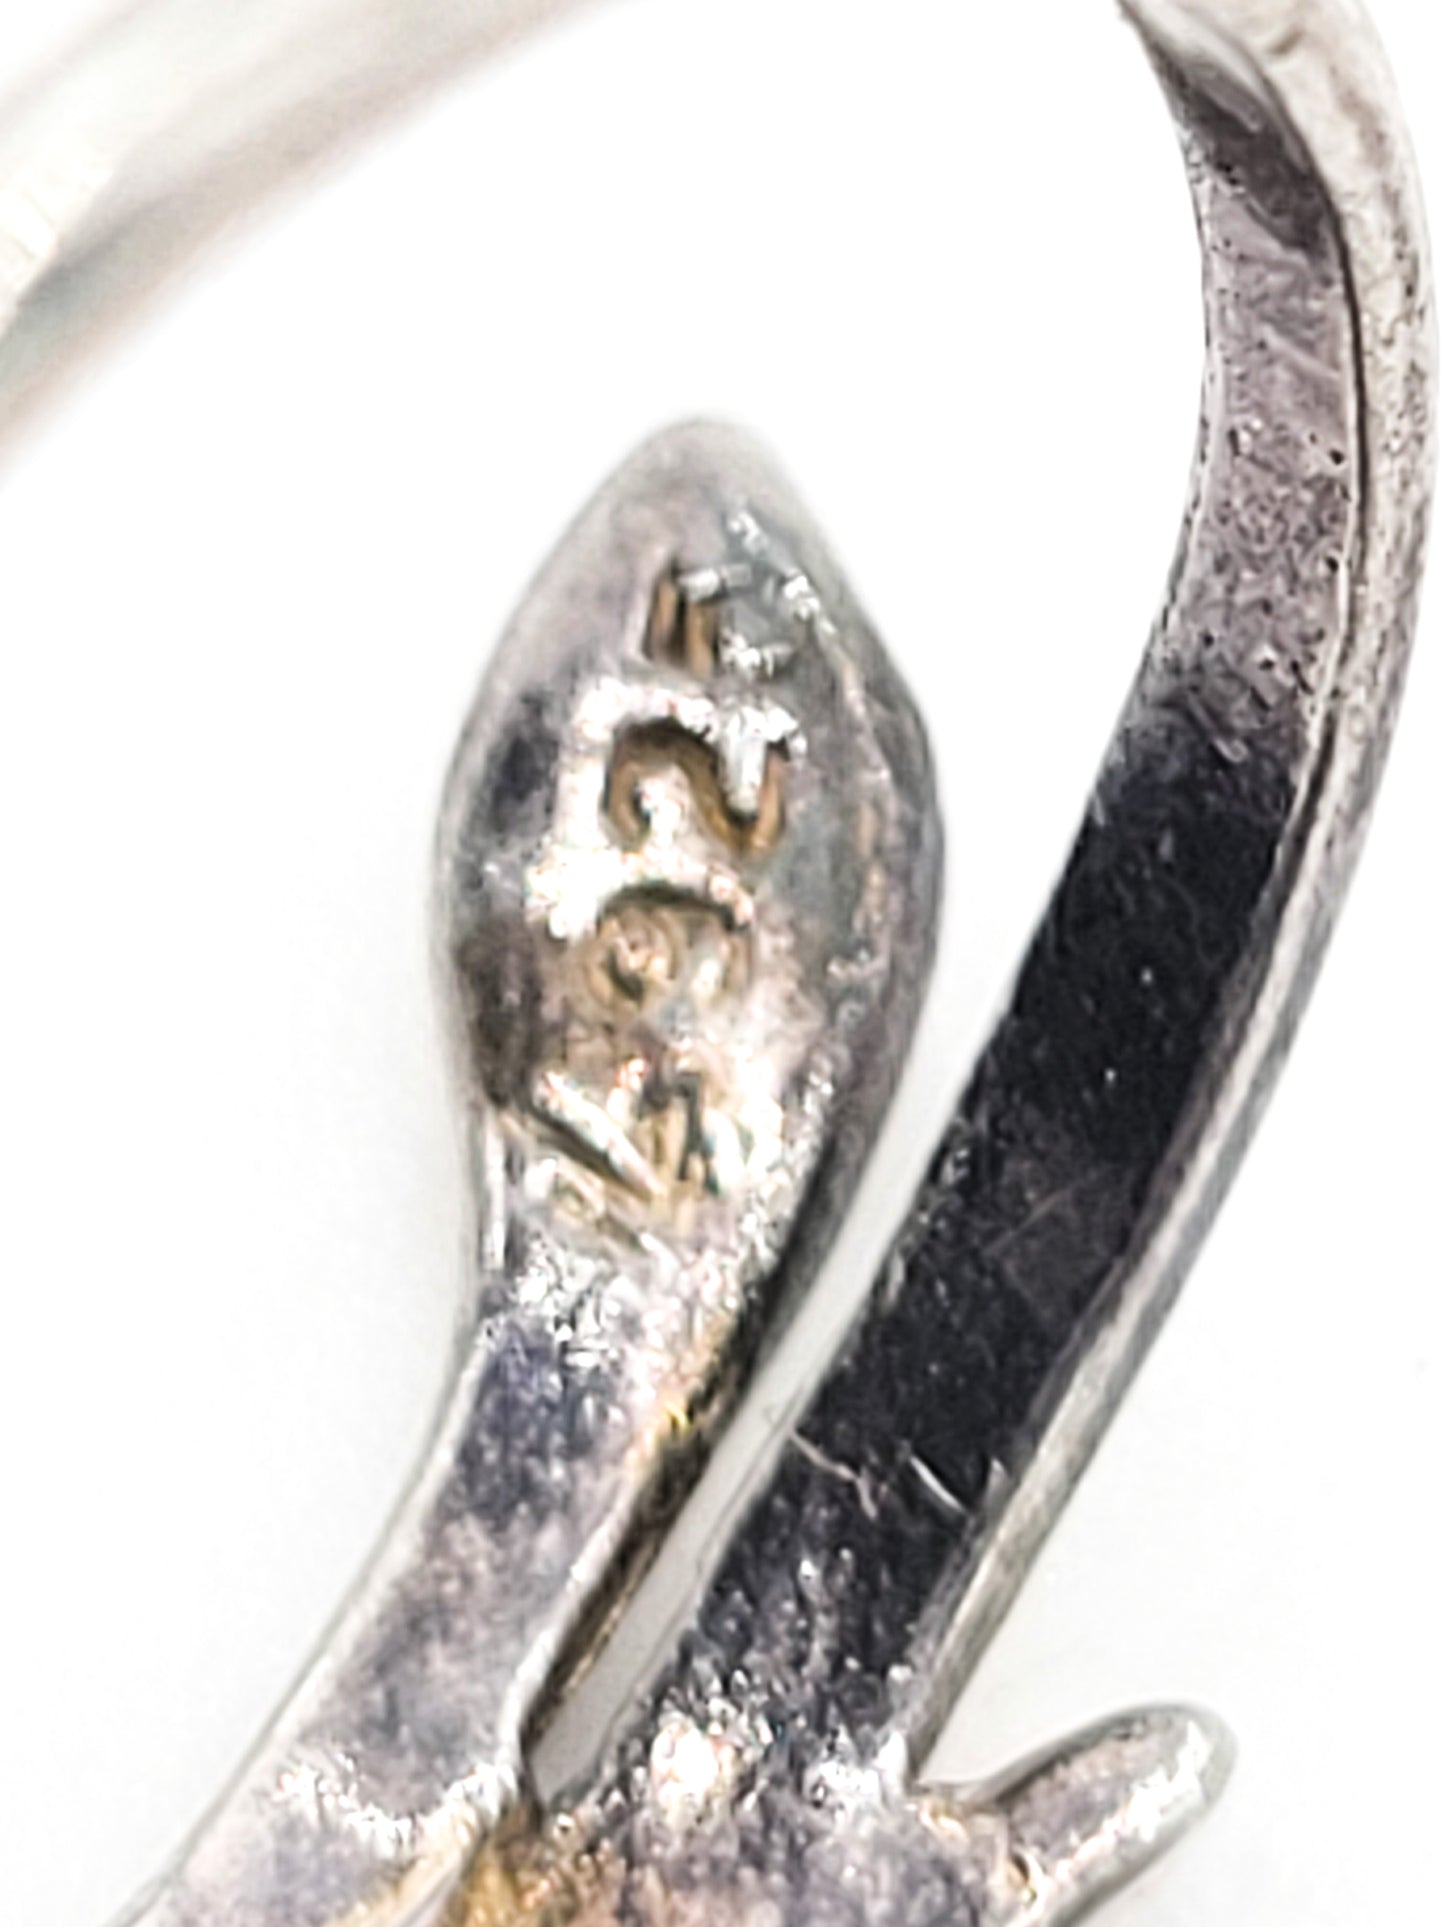 Snake artisan etched reptile vintage sterling silver ring size 6